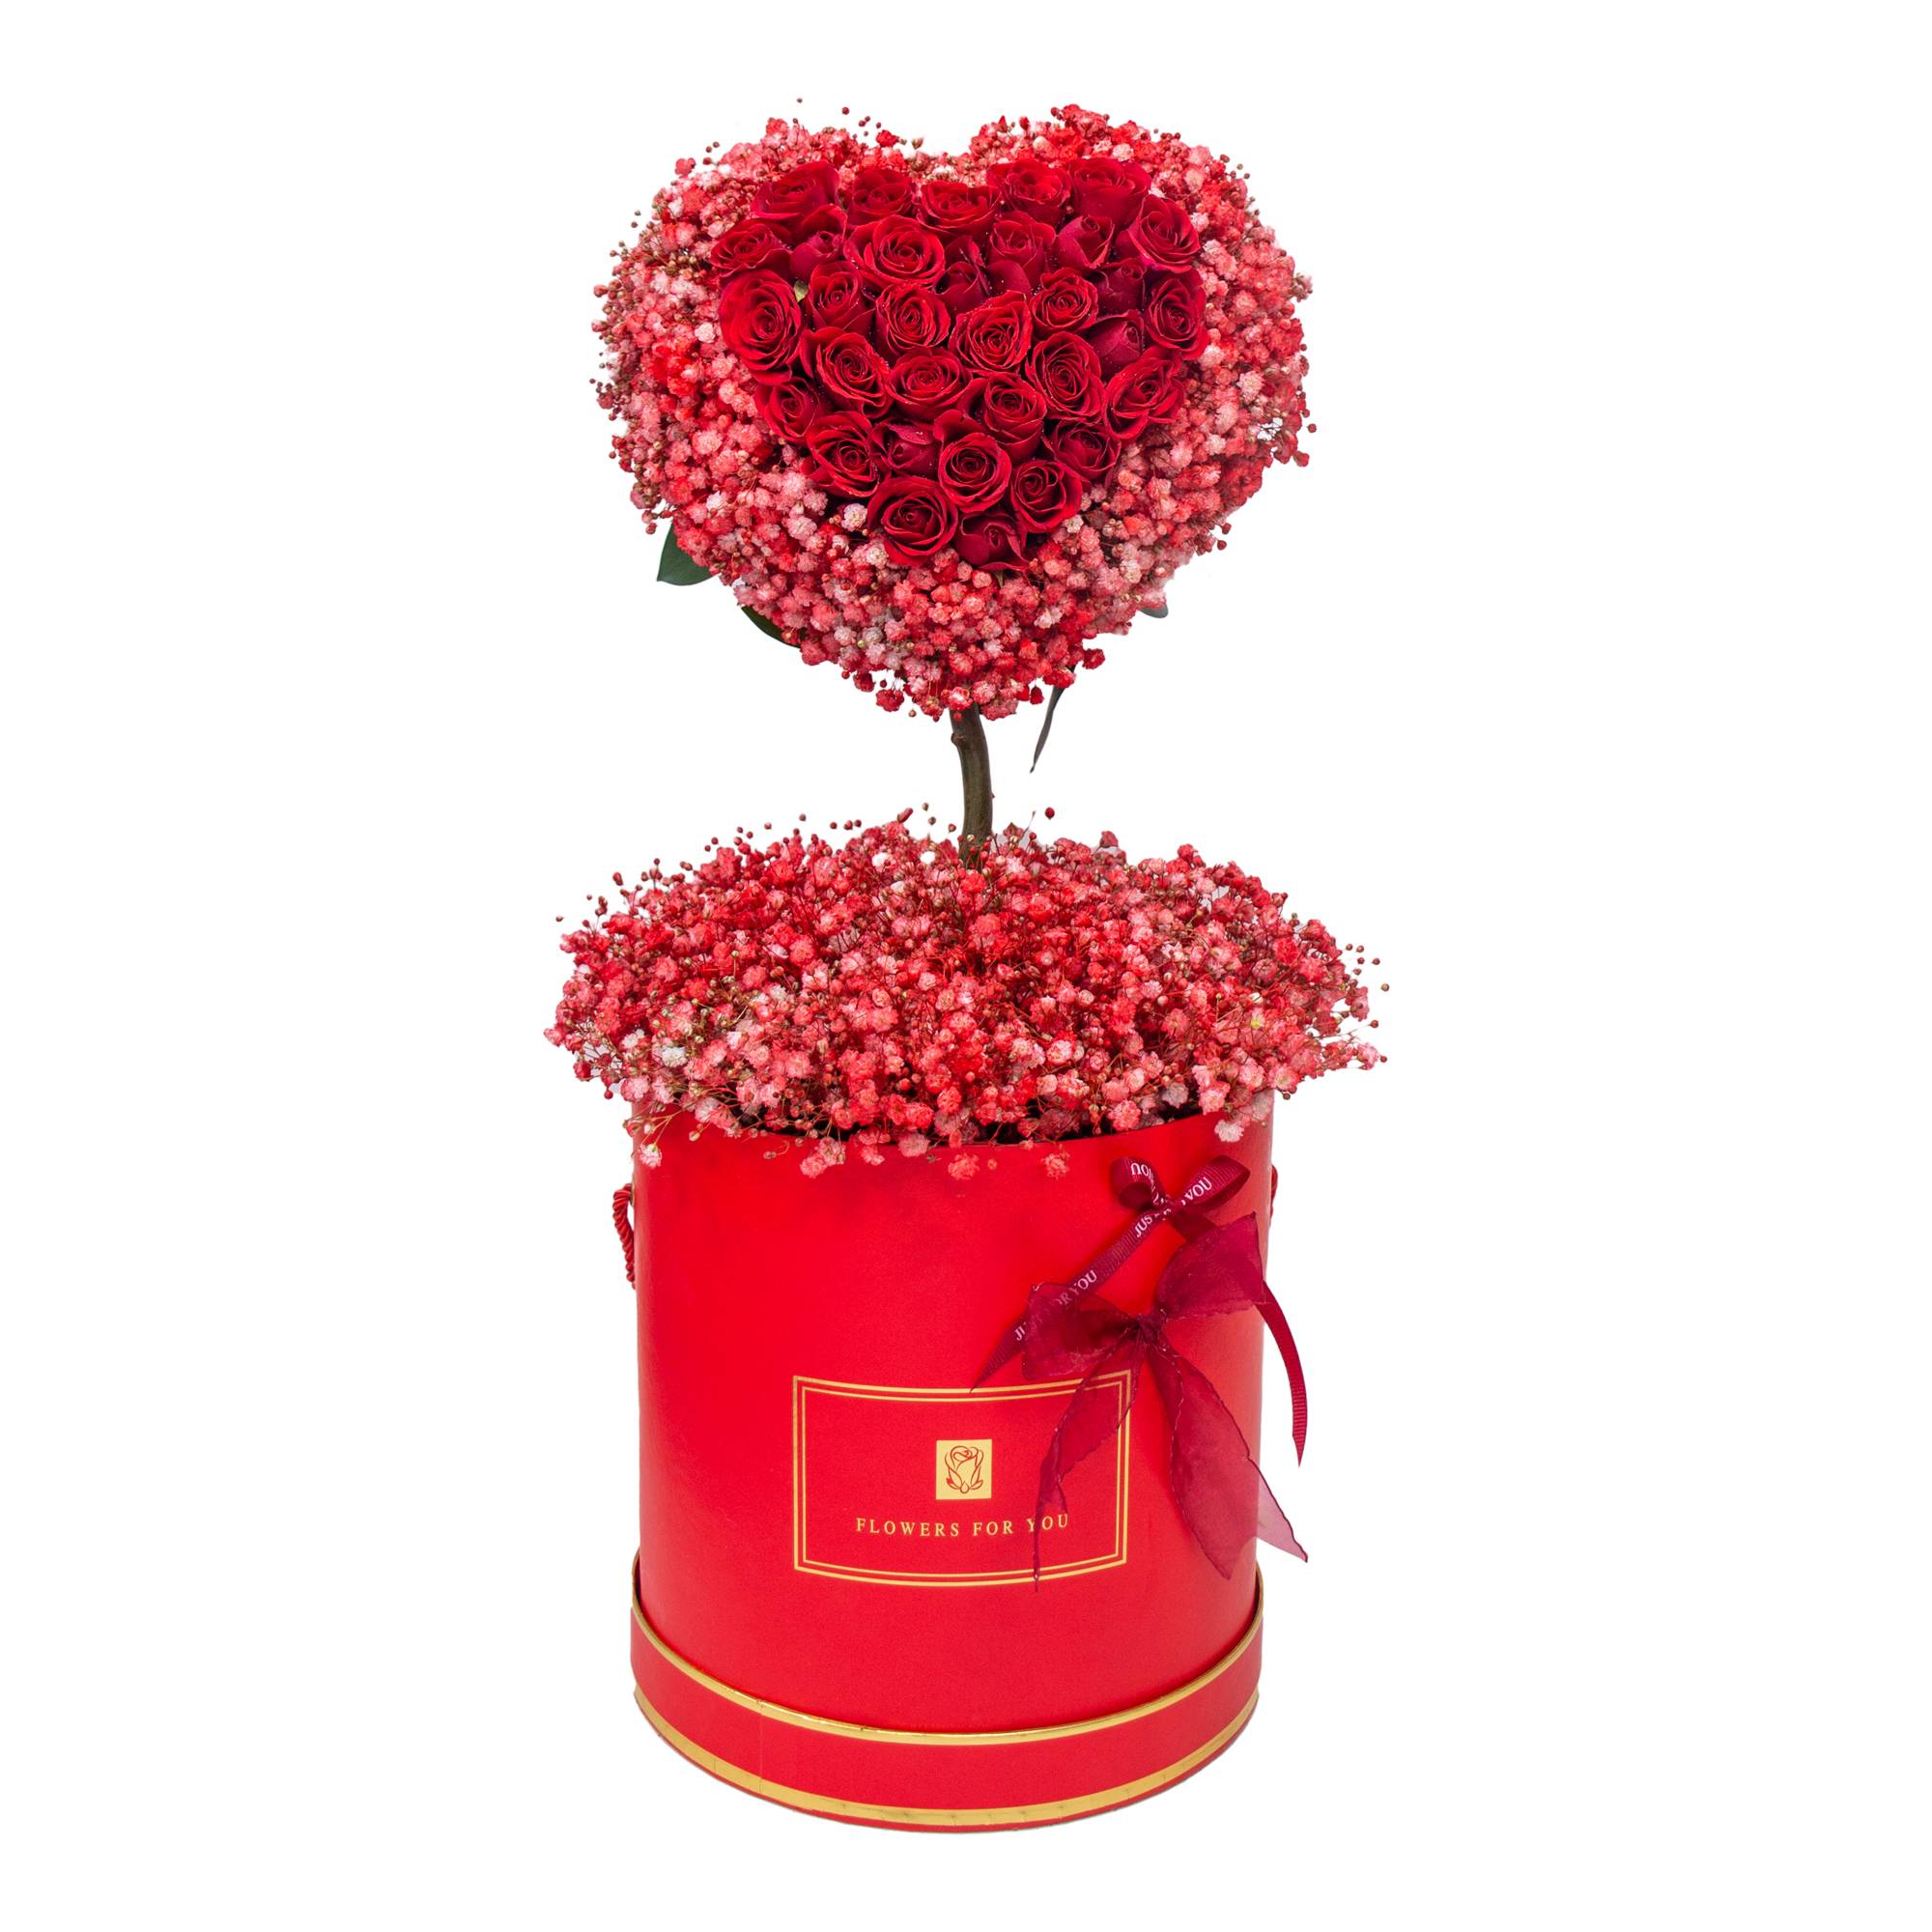 Gypso mixed with Red Roses Basket | Flower Gift Center